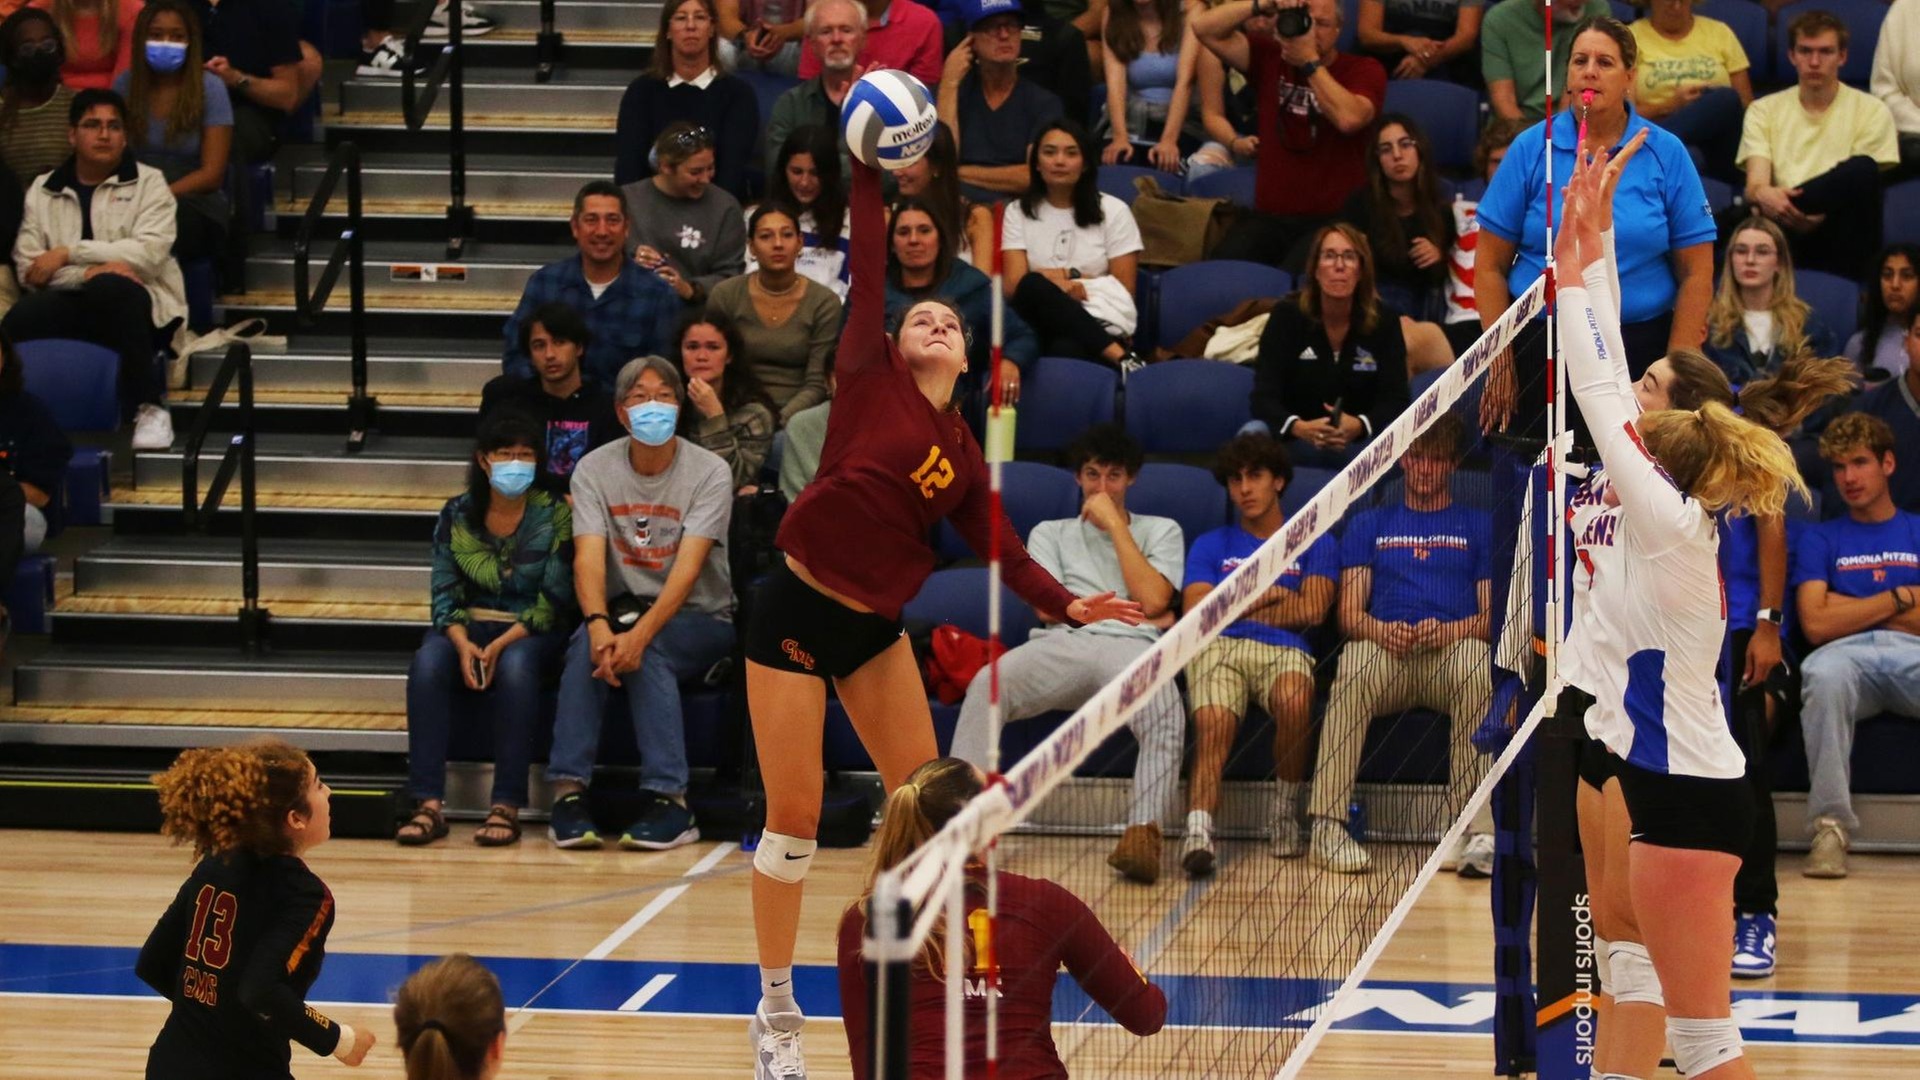 Jenna Holmes had a double-double with 13 kills in 29 attempts